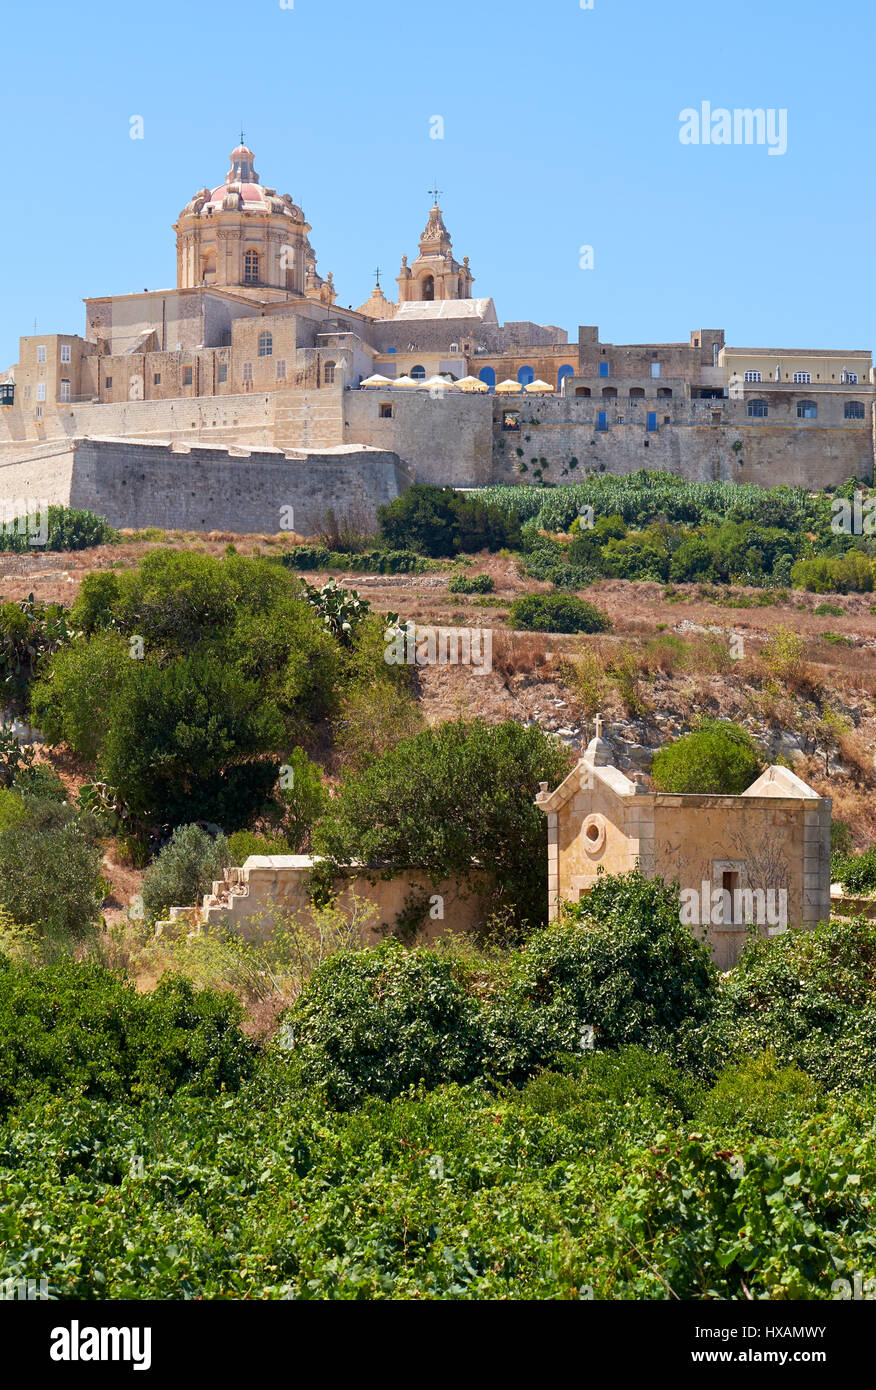 The view of the old capital Mdina surrounding by the fortress wall from the countryside below. Malta Stock Photo